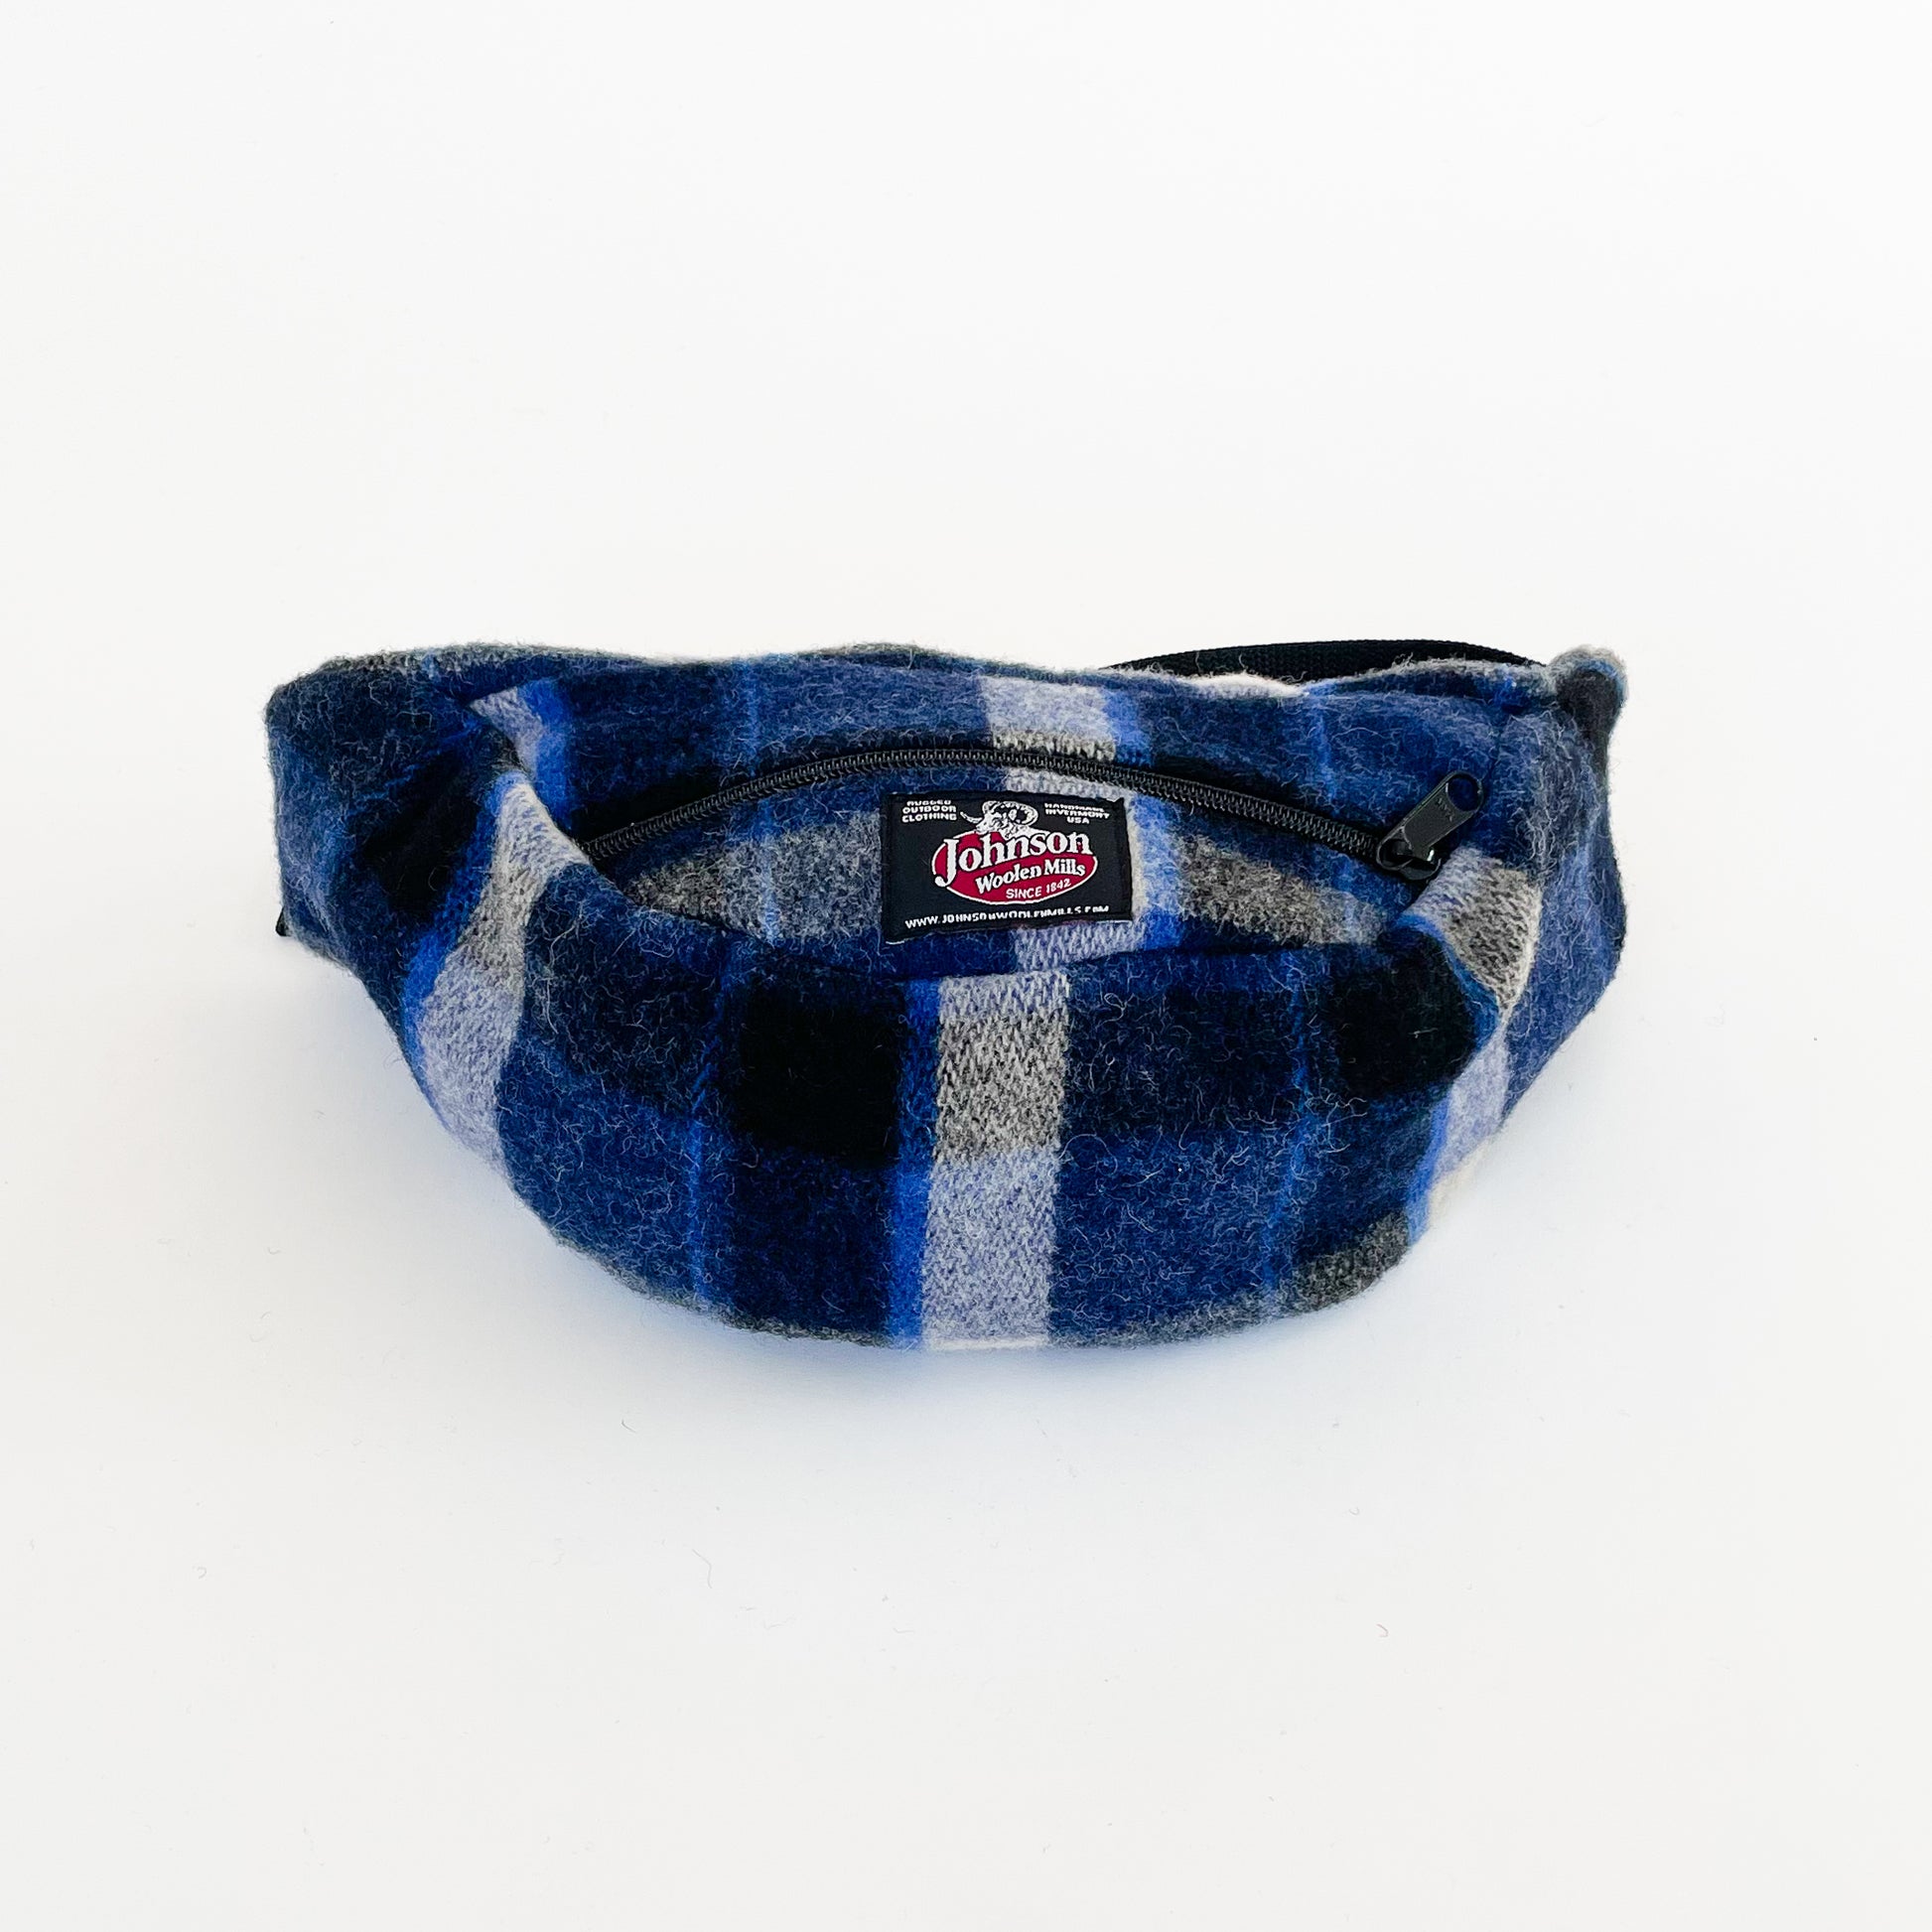 Johnson Woolen Mills Oversized Fanny Pack Blue/Navy/Cream Plaid bottom and front view